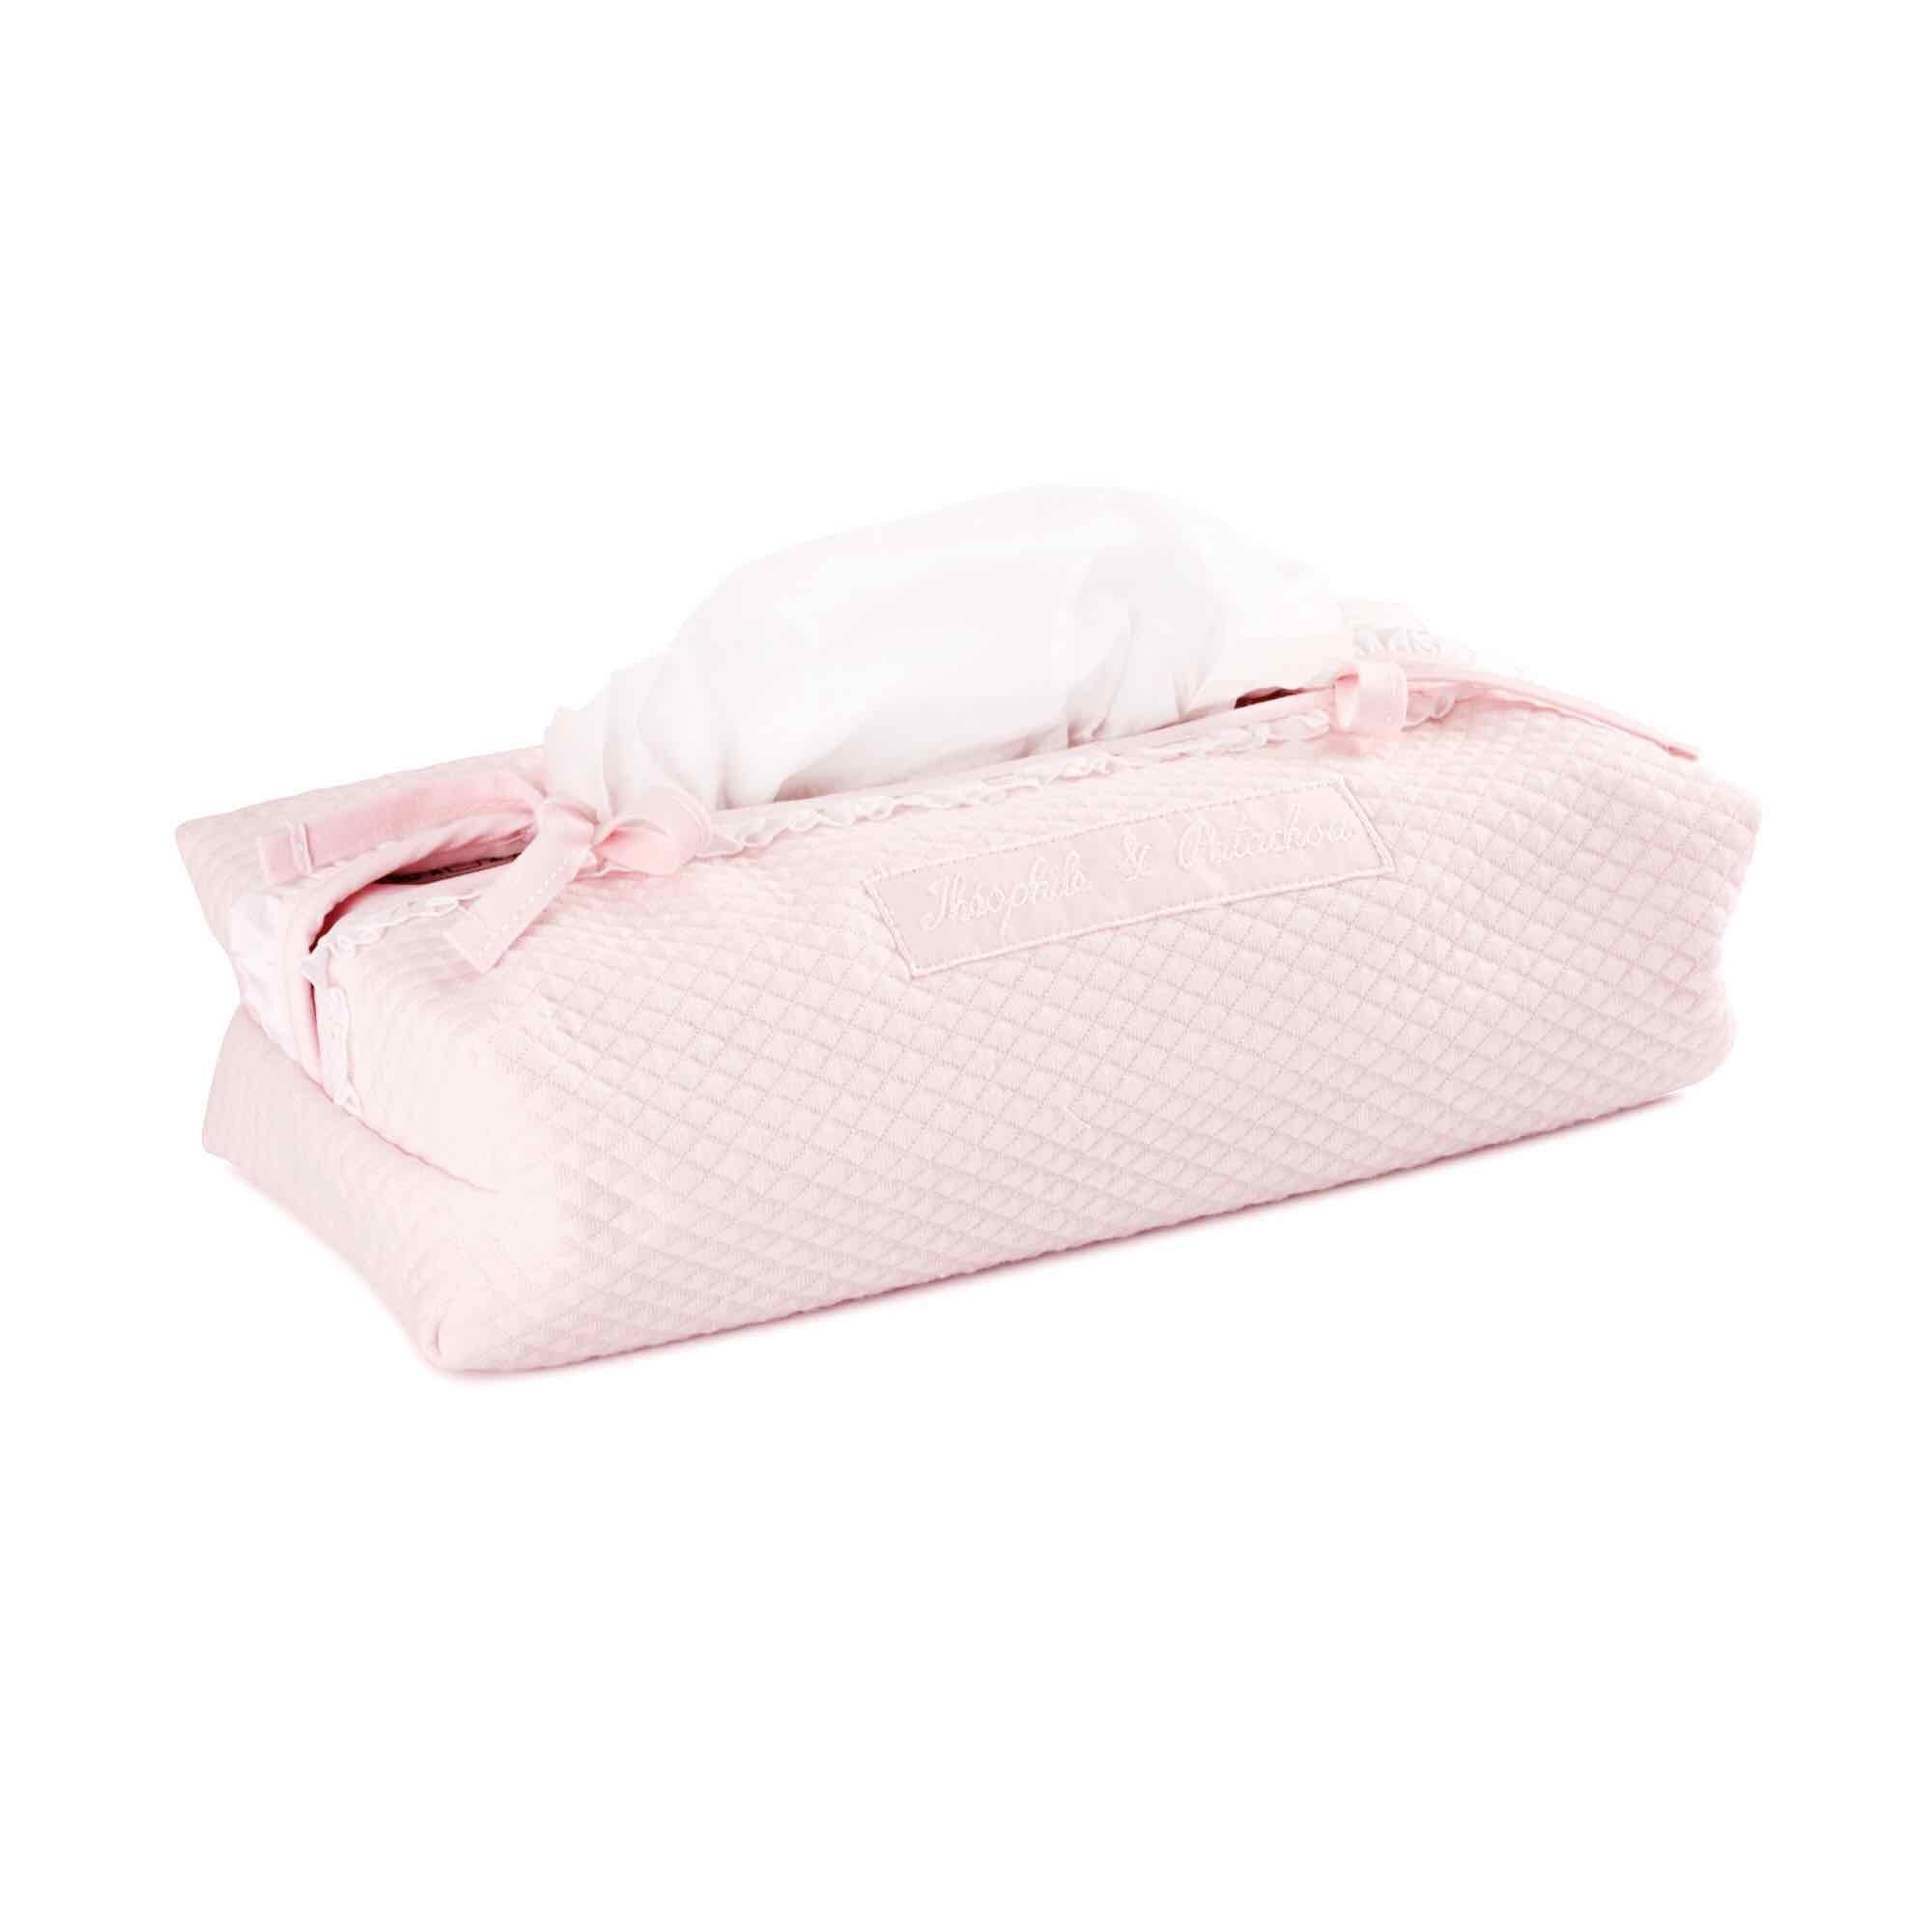 Theophile & Patachou Tissue Cover - Royal Pink